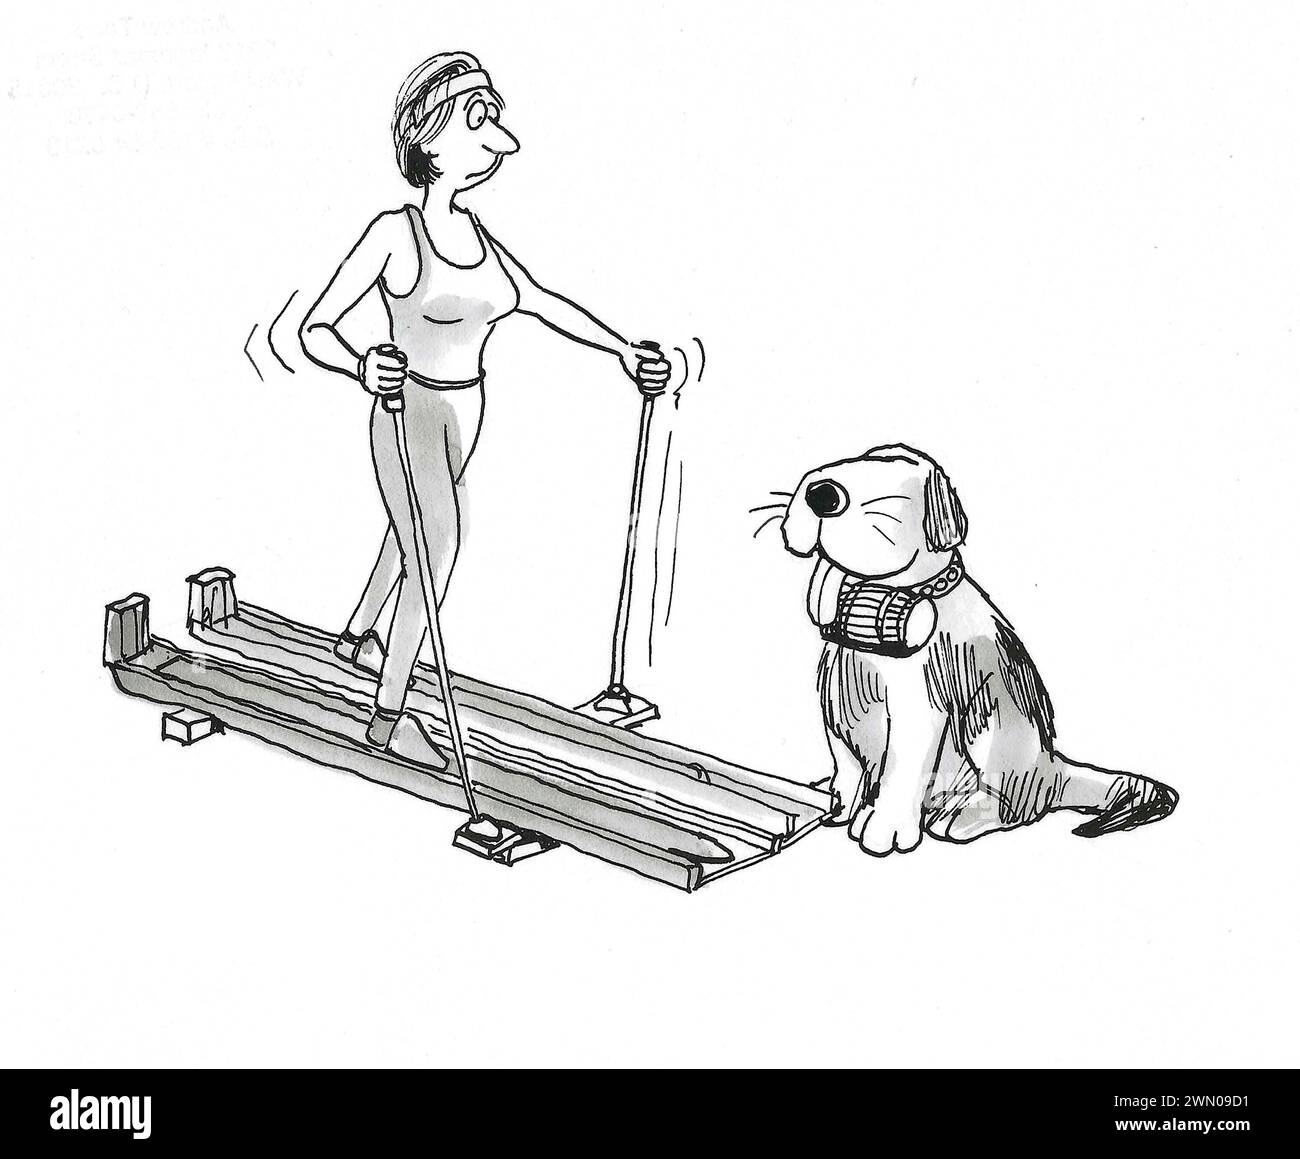 BW cartoon of a woman sliding on indoor skis with a mountain dog ready to aid if needed. Stock Photo